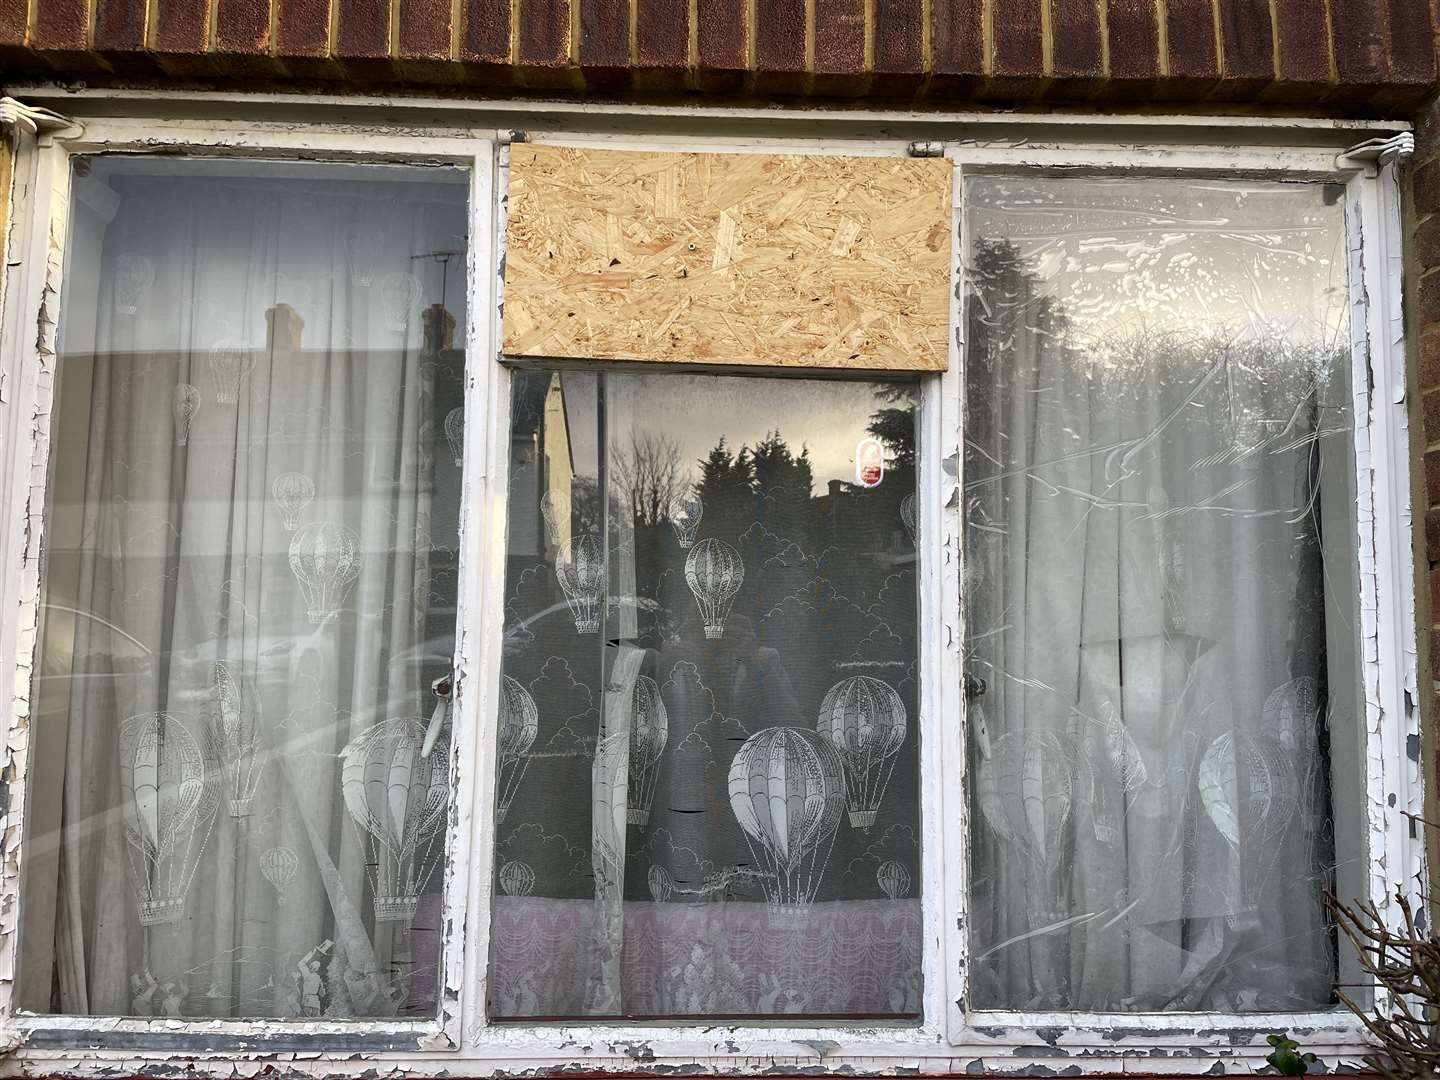 Two of the windows have been smashed